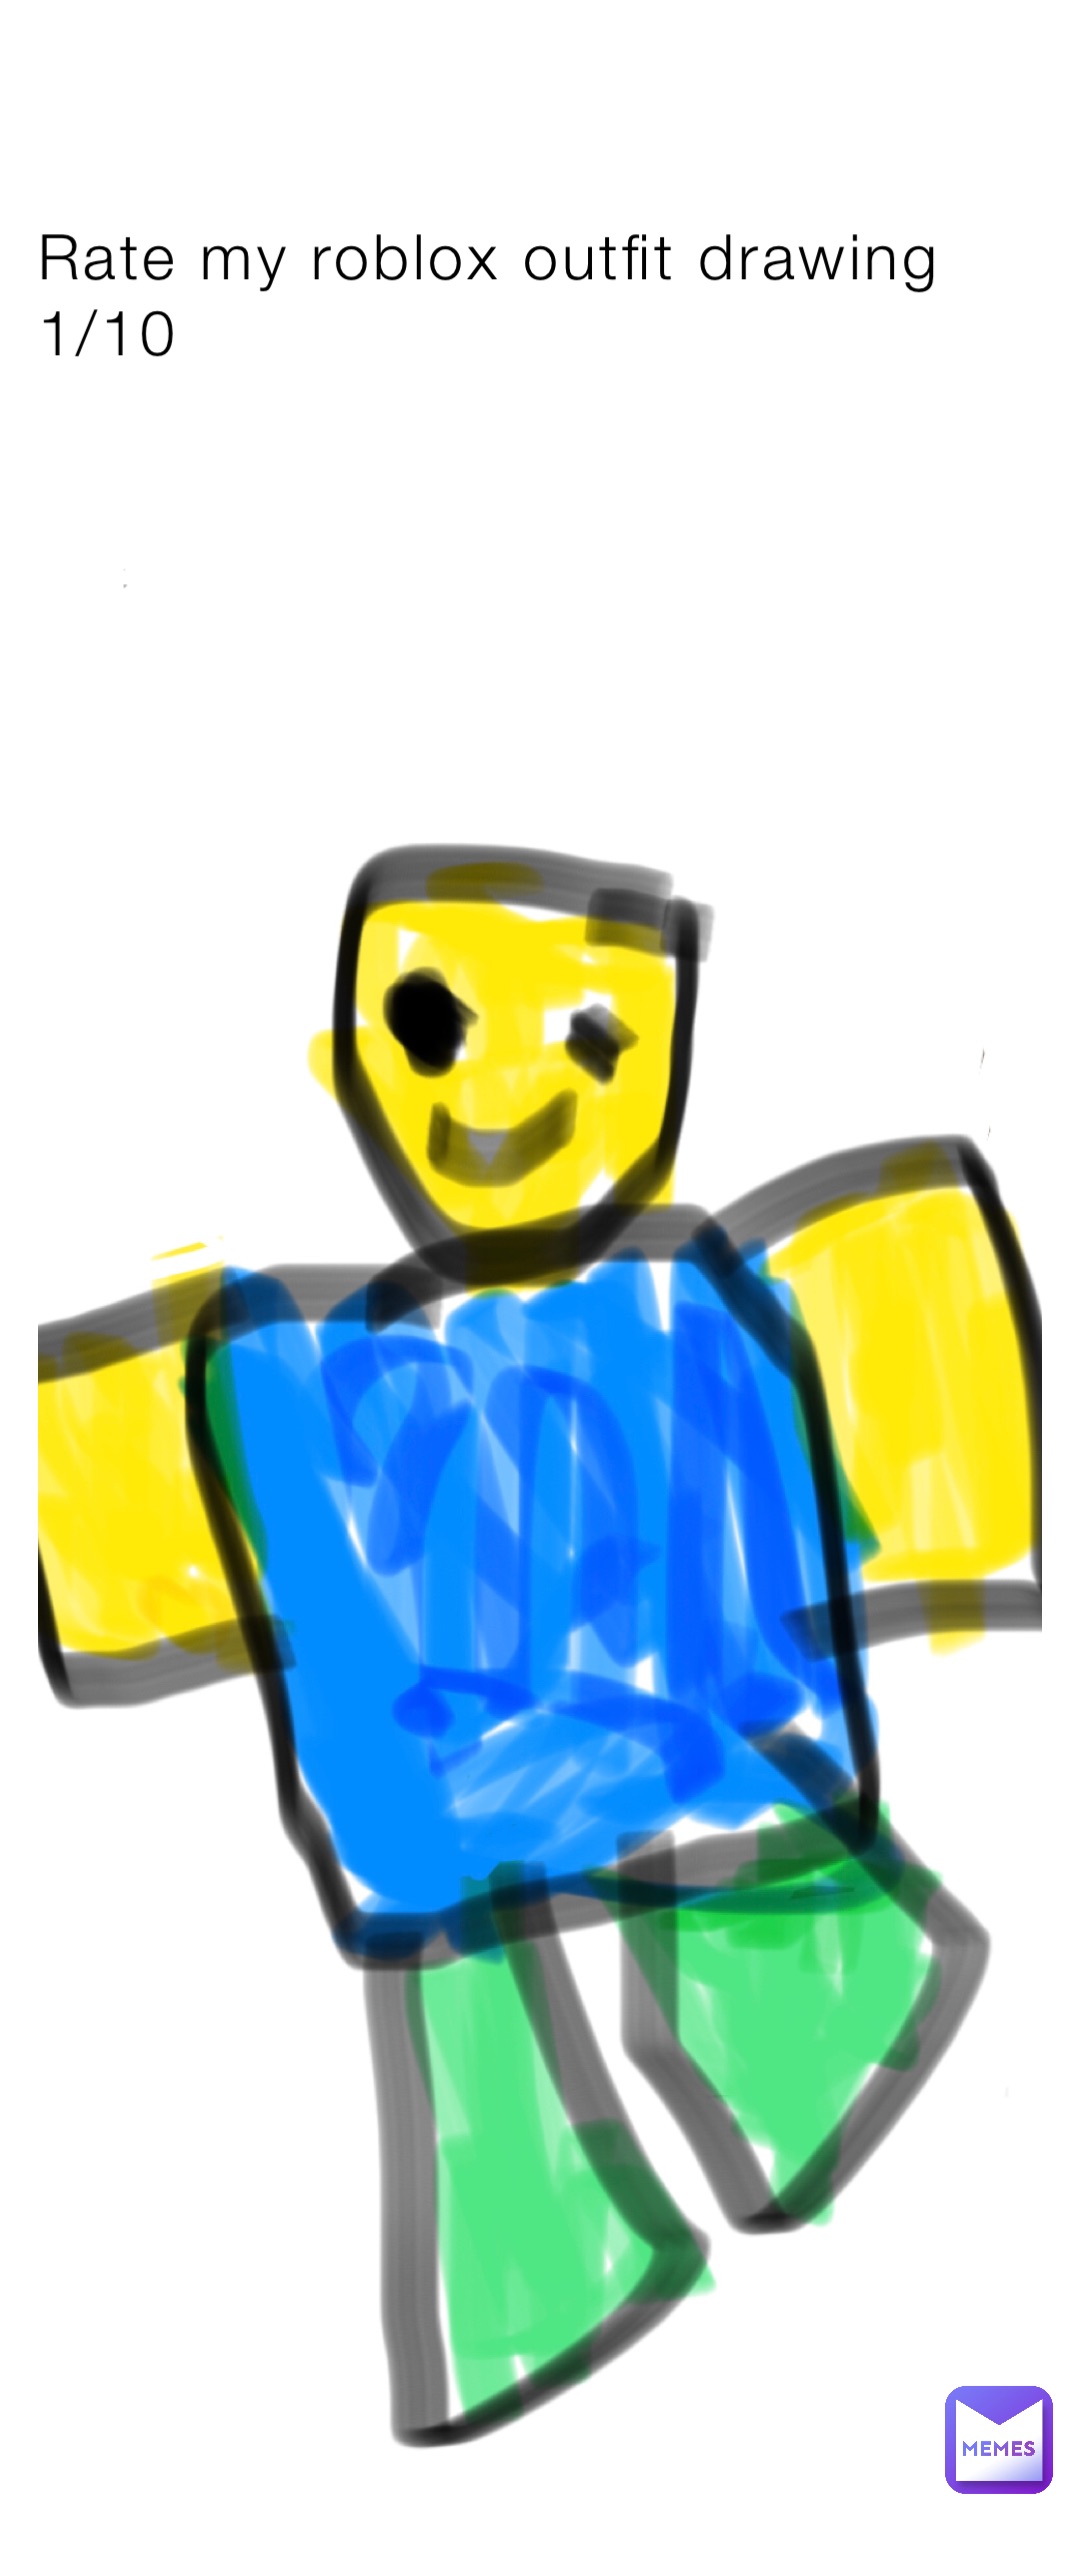 Rate my roblox outfit drawing 1/10